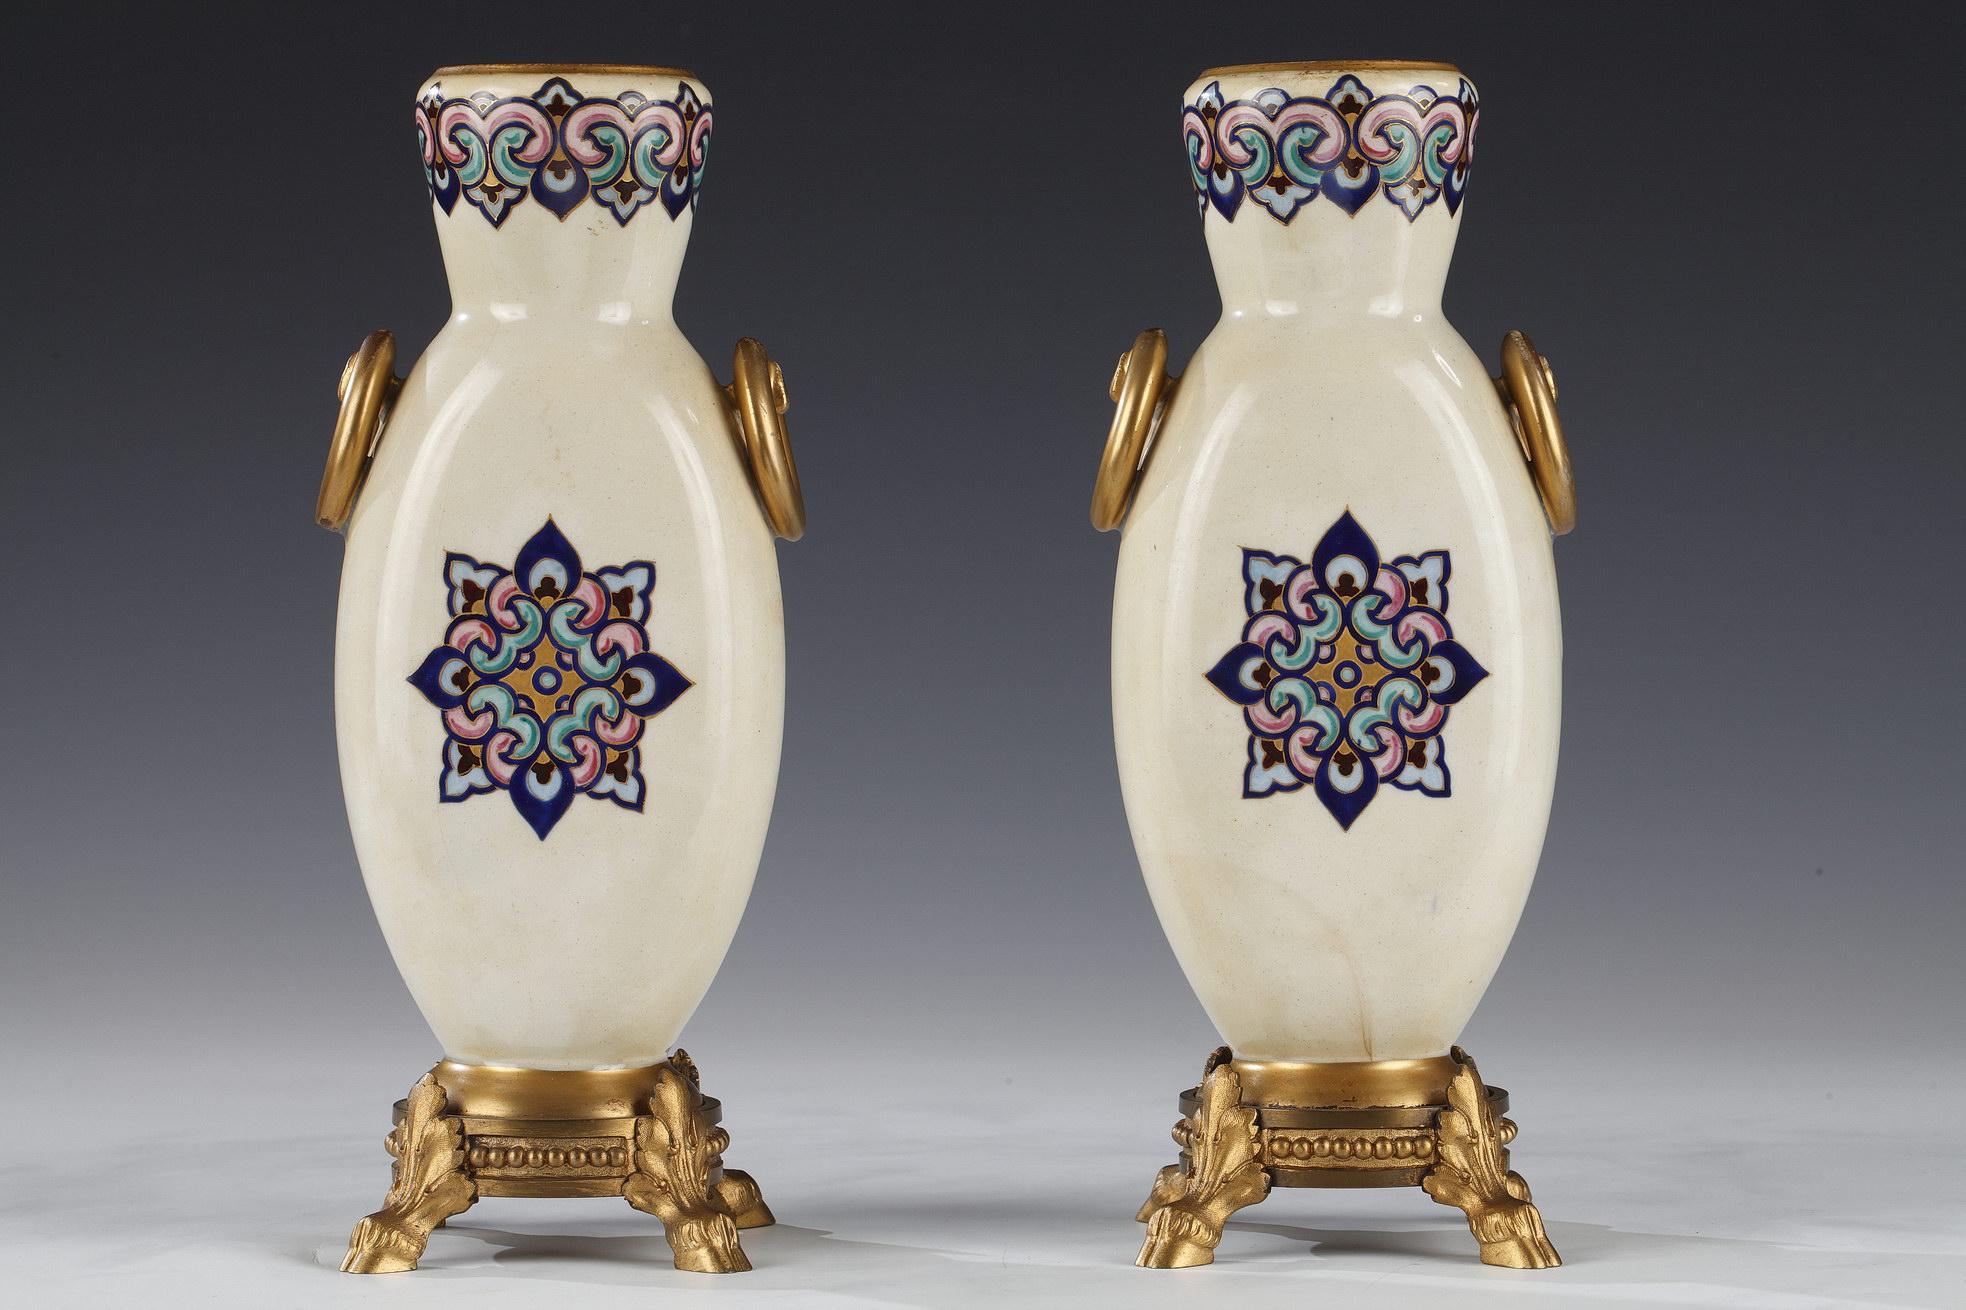 Signed RSA Bellanger

Small pair of polychrome enamel and ivory ceramic vases with gold-rimmed neck, decorated with trompe-l’œil handles in the shape of rings. They are adorned on the belly of painted orientalist water carrier and zither player in